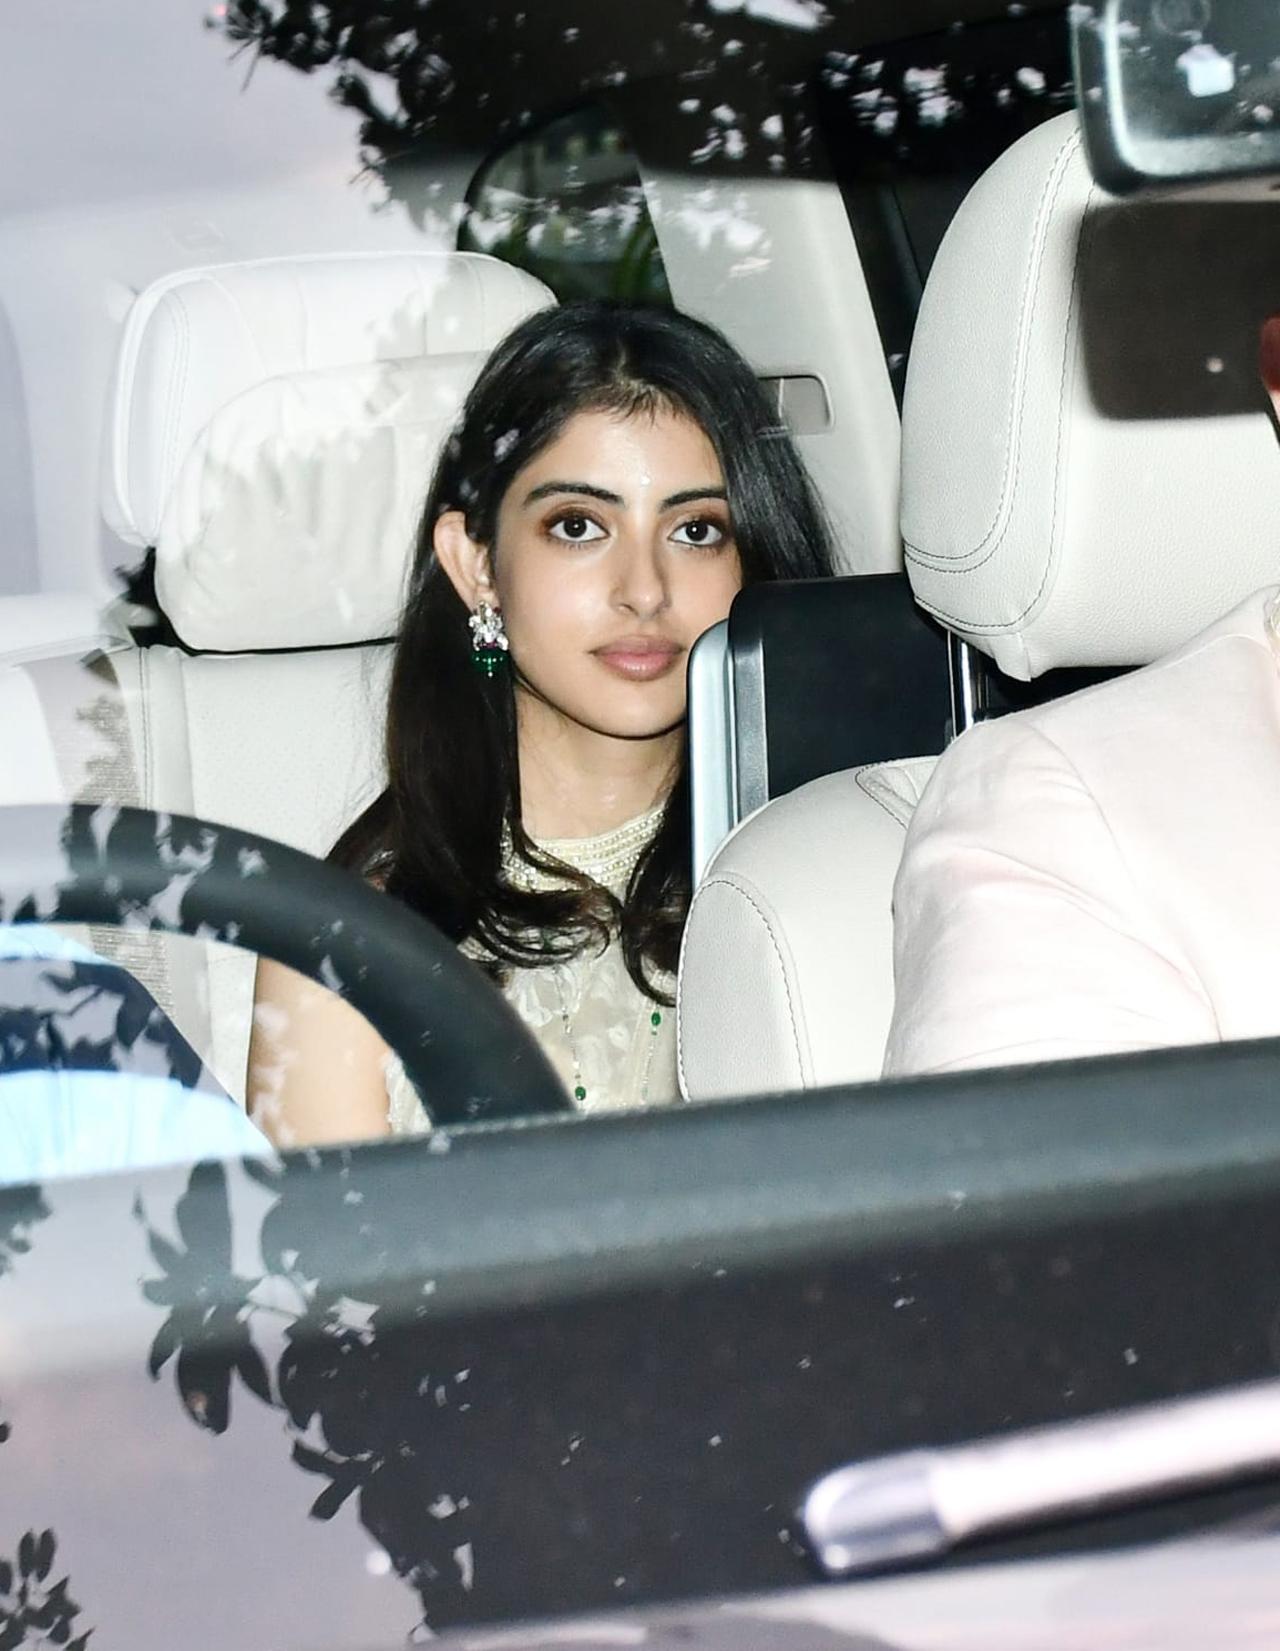 Amitabh Bachchan's granddaughter Navya Naveli Nanda also made an appearance. The wedding list of Ranbir Kapoor and Alia Bhatt isn't confirmed yet. We wonder if the Bachchans would grace the wedding or not.